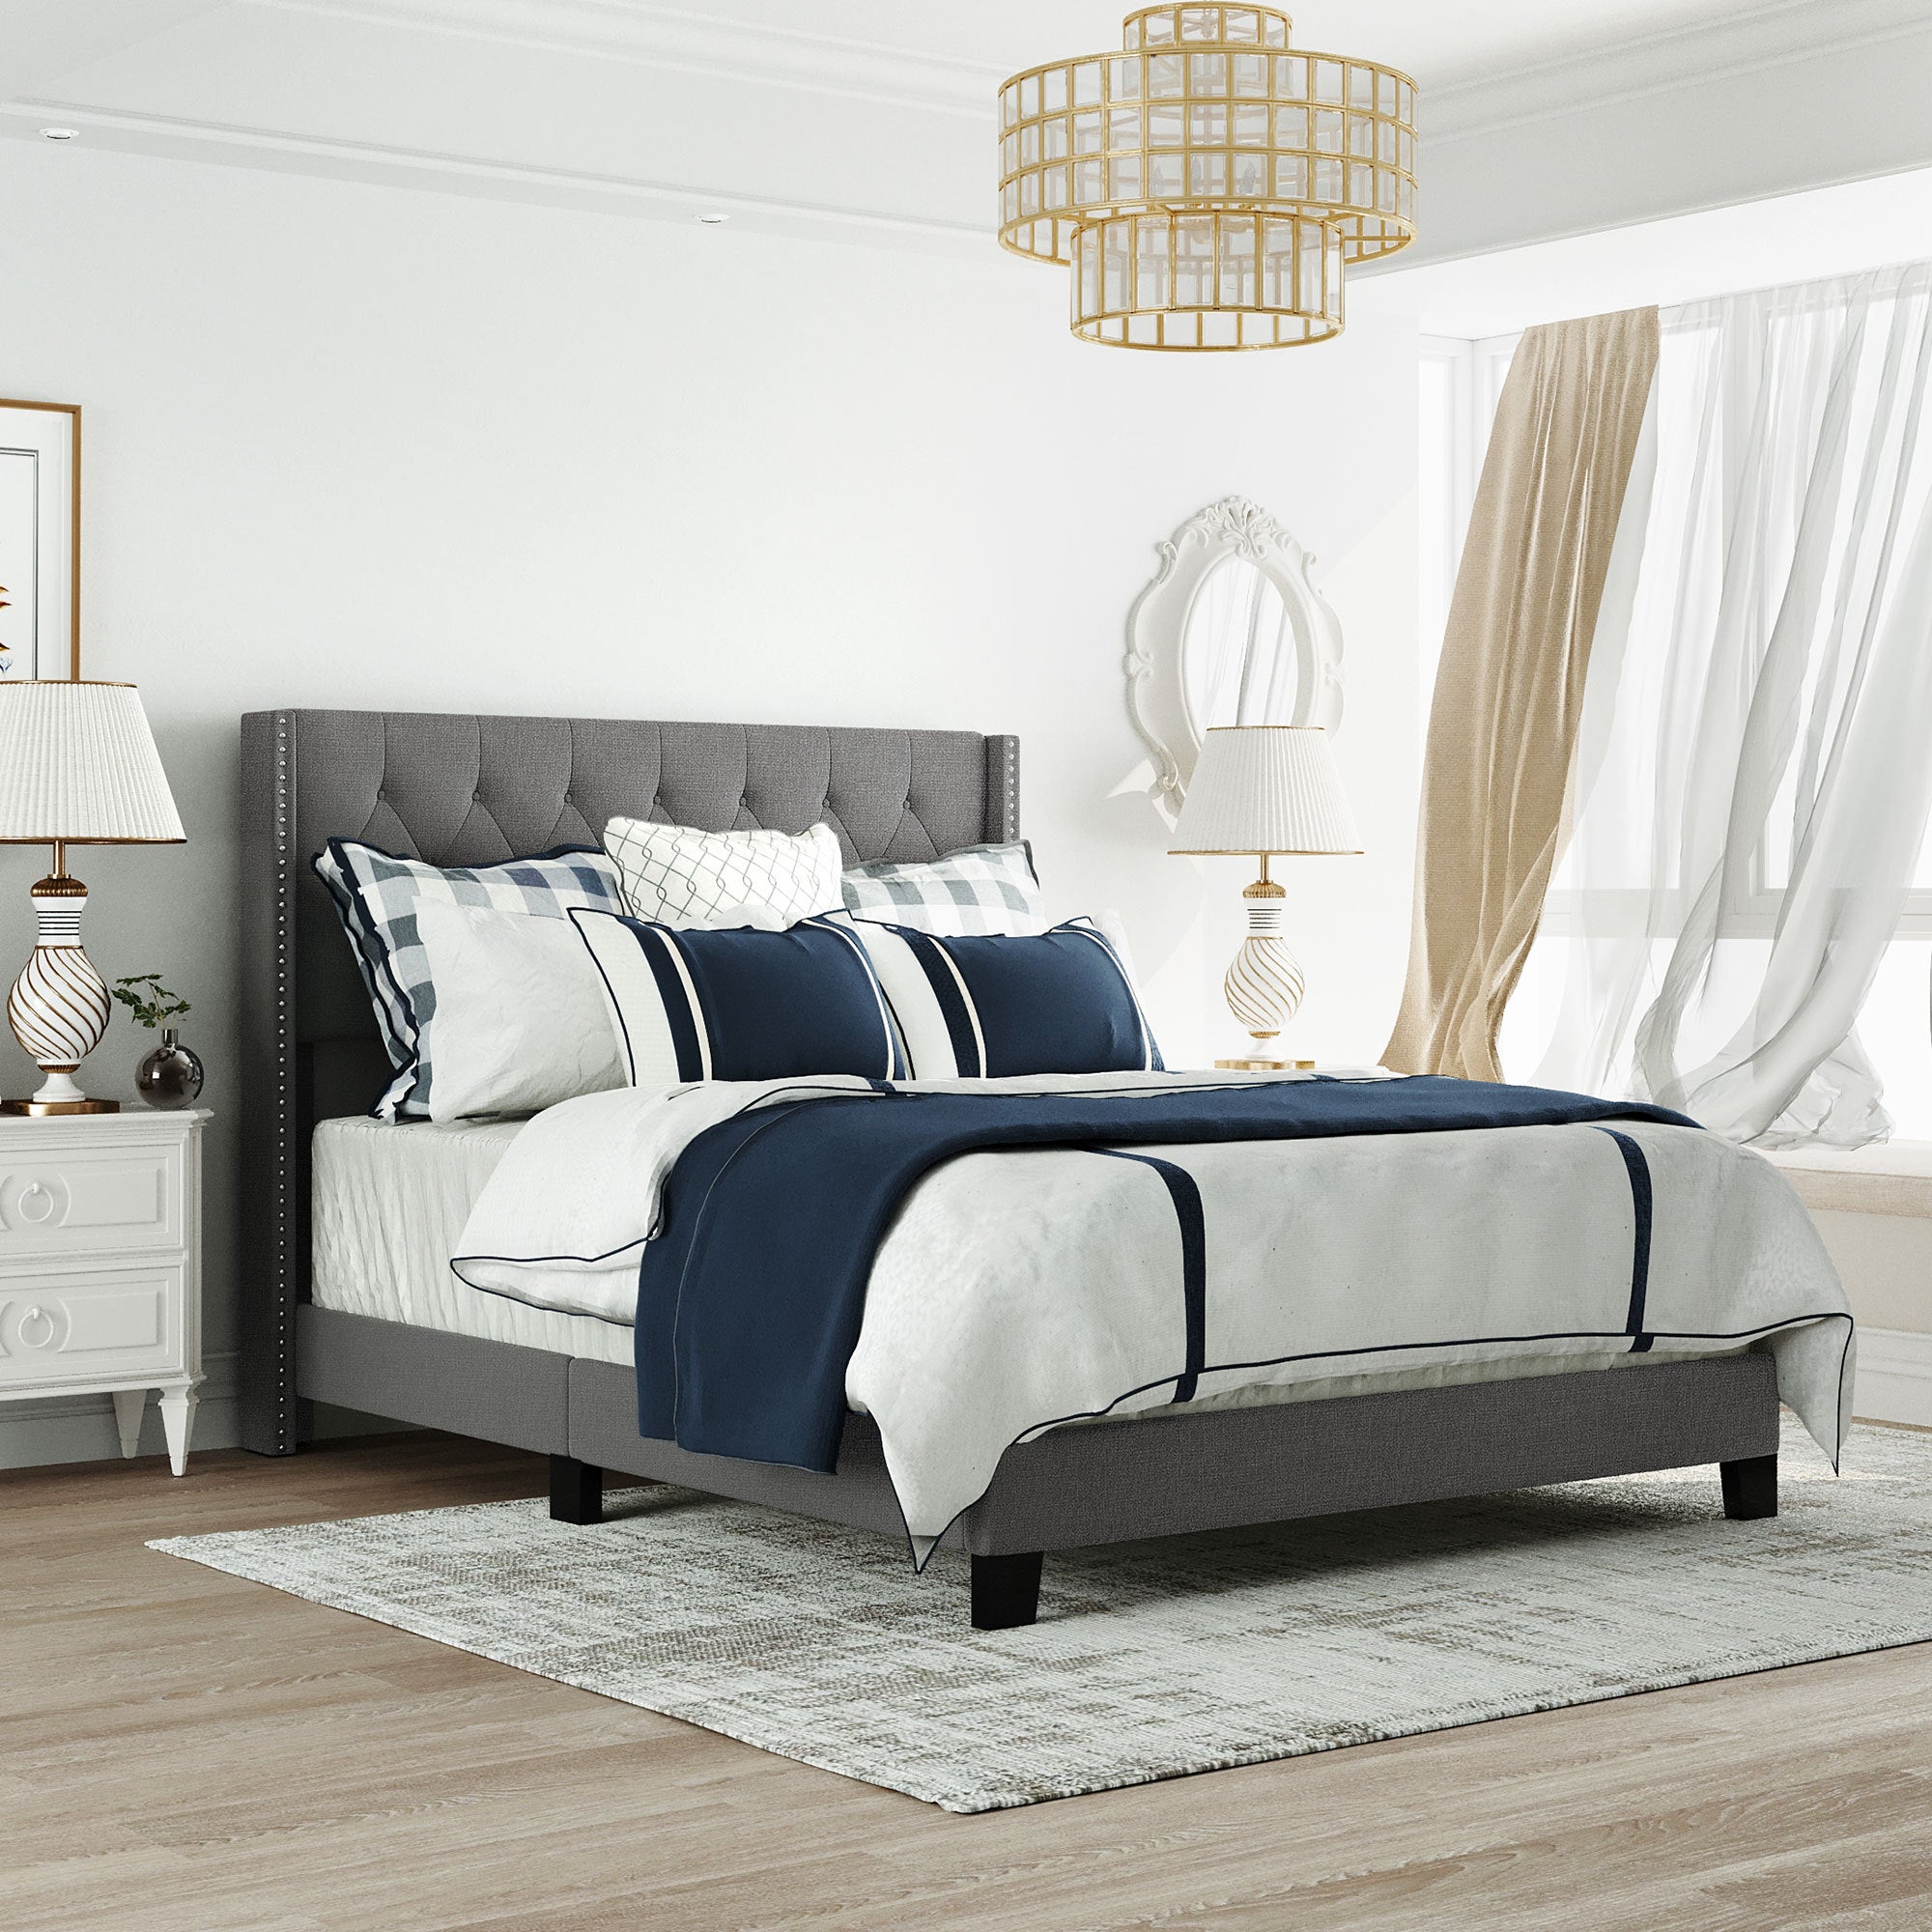 Upholstered Platform Bed with Classic Headboard, Box gray-upholstered